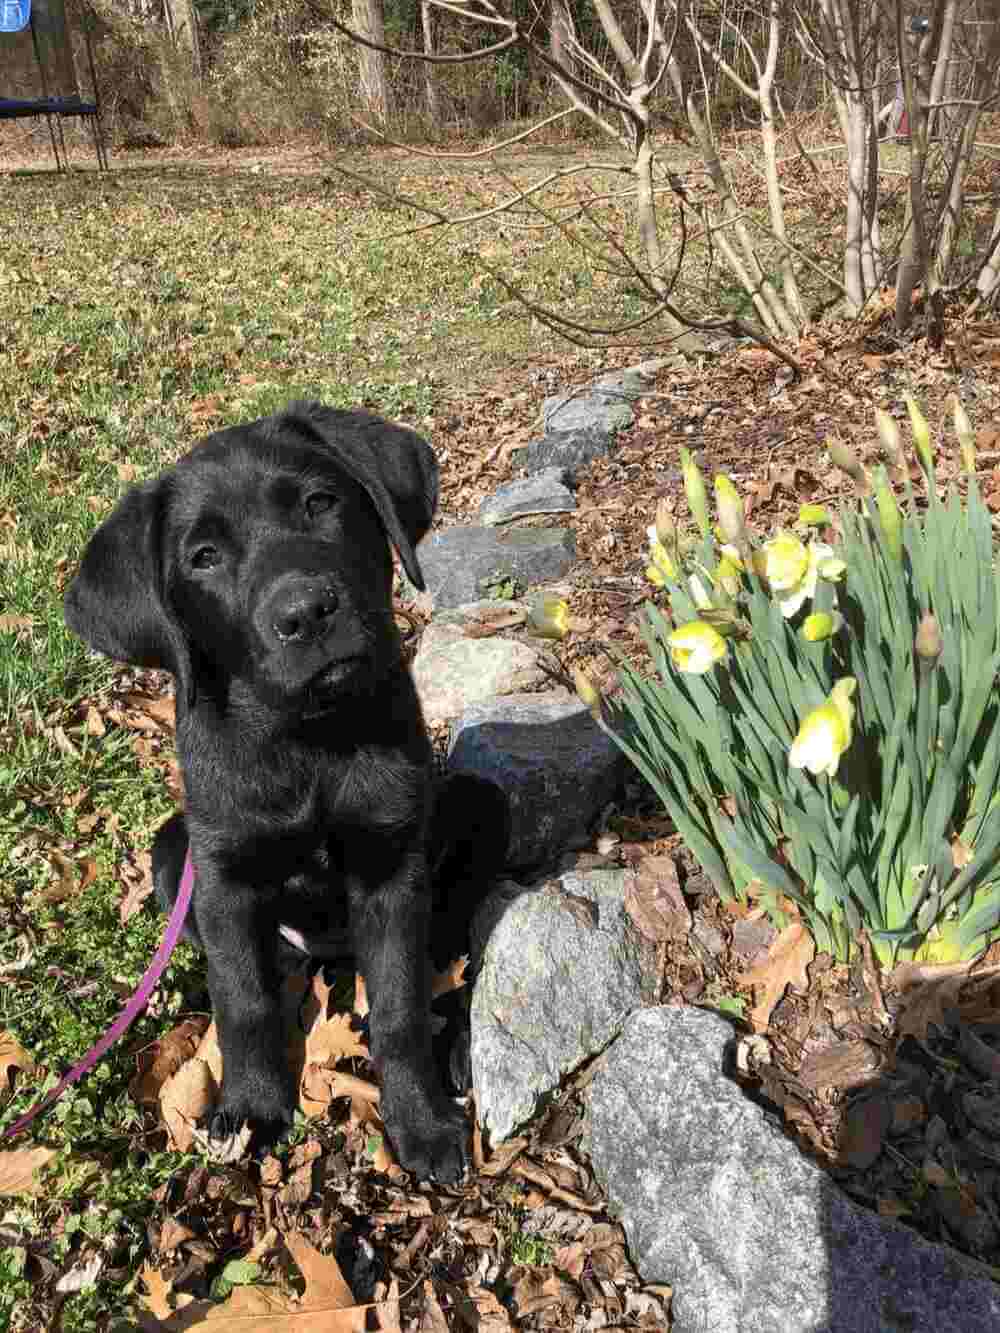 Black lab puppy Queenie sits attentively in the grass yard beside a bed of white tulips that are just beginning to open.